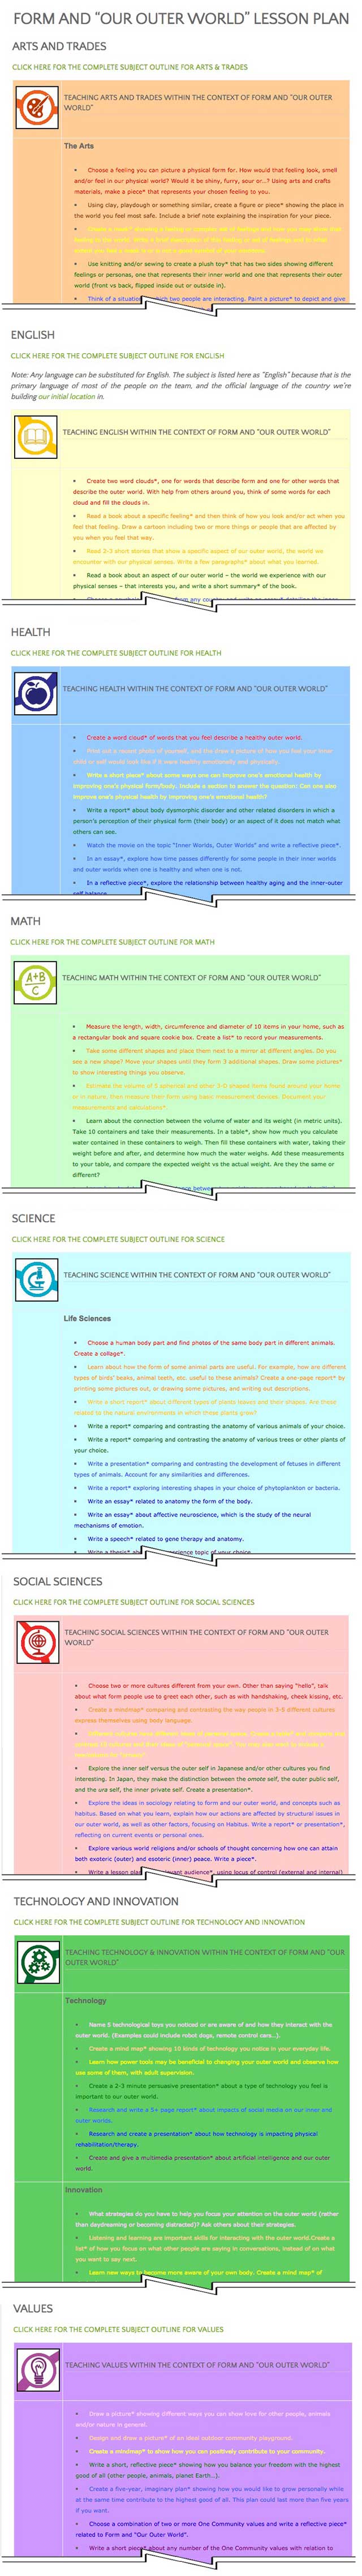 This last week the core team transferred all of the written content for the Form and Our Outer World Lesson Plan to the website, as you see here. This lesson plan is purposed to teach all subjects, to all learning levels, in any learning environment, using the central theme of “Form and Our Outer World”.